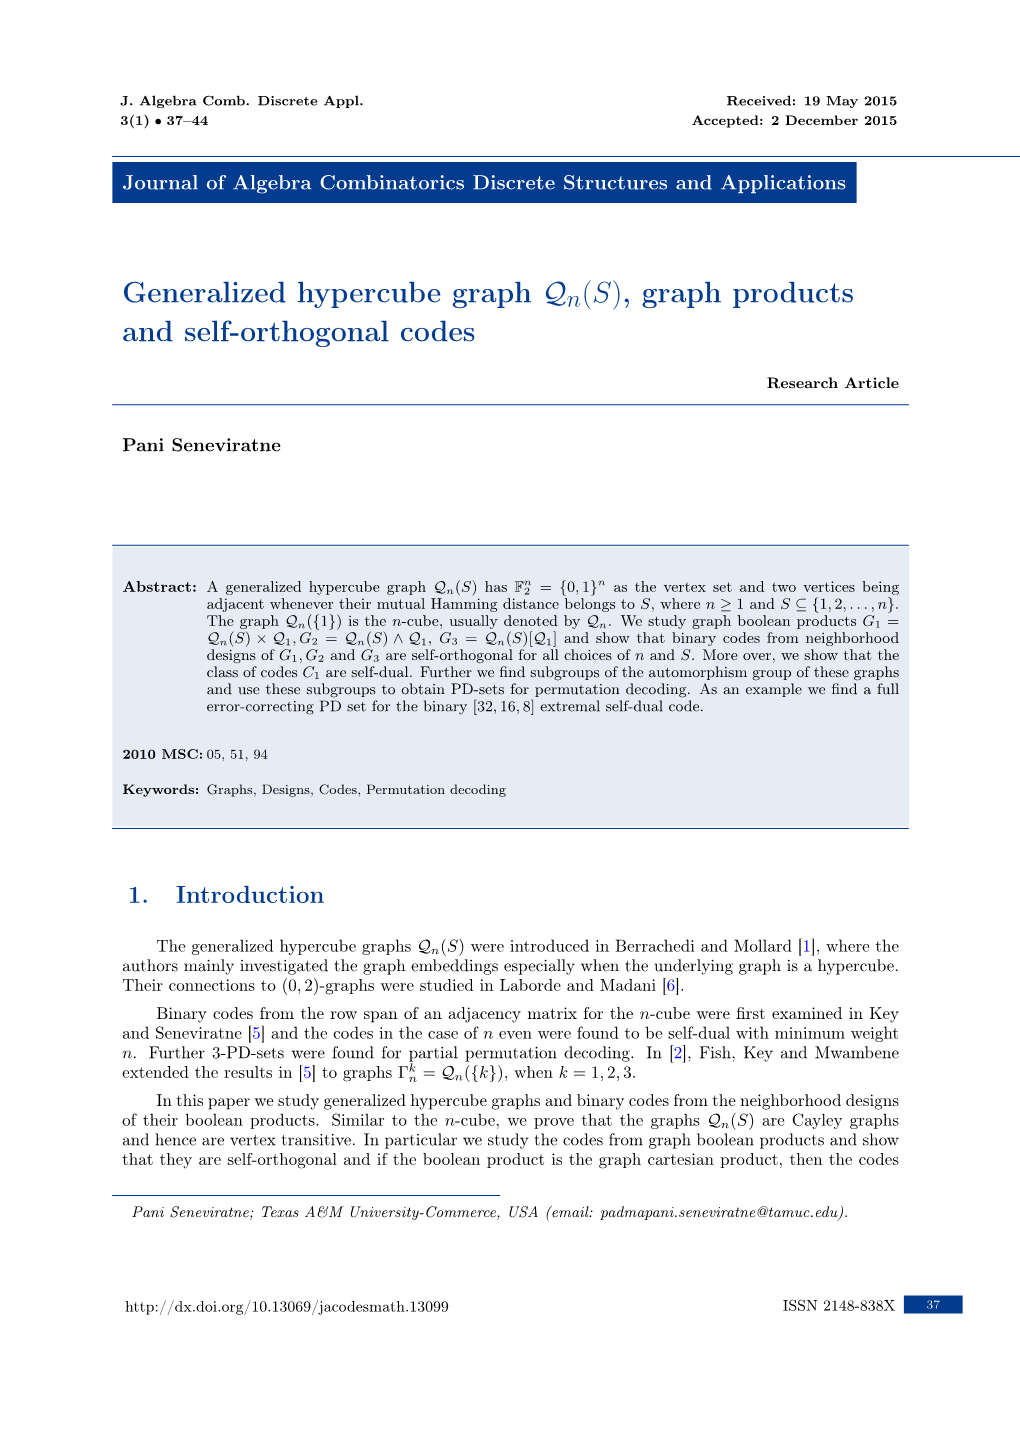 Generalized Hypercube Graph Qn(S), Graph Products and Self-Orthogonal Codes